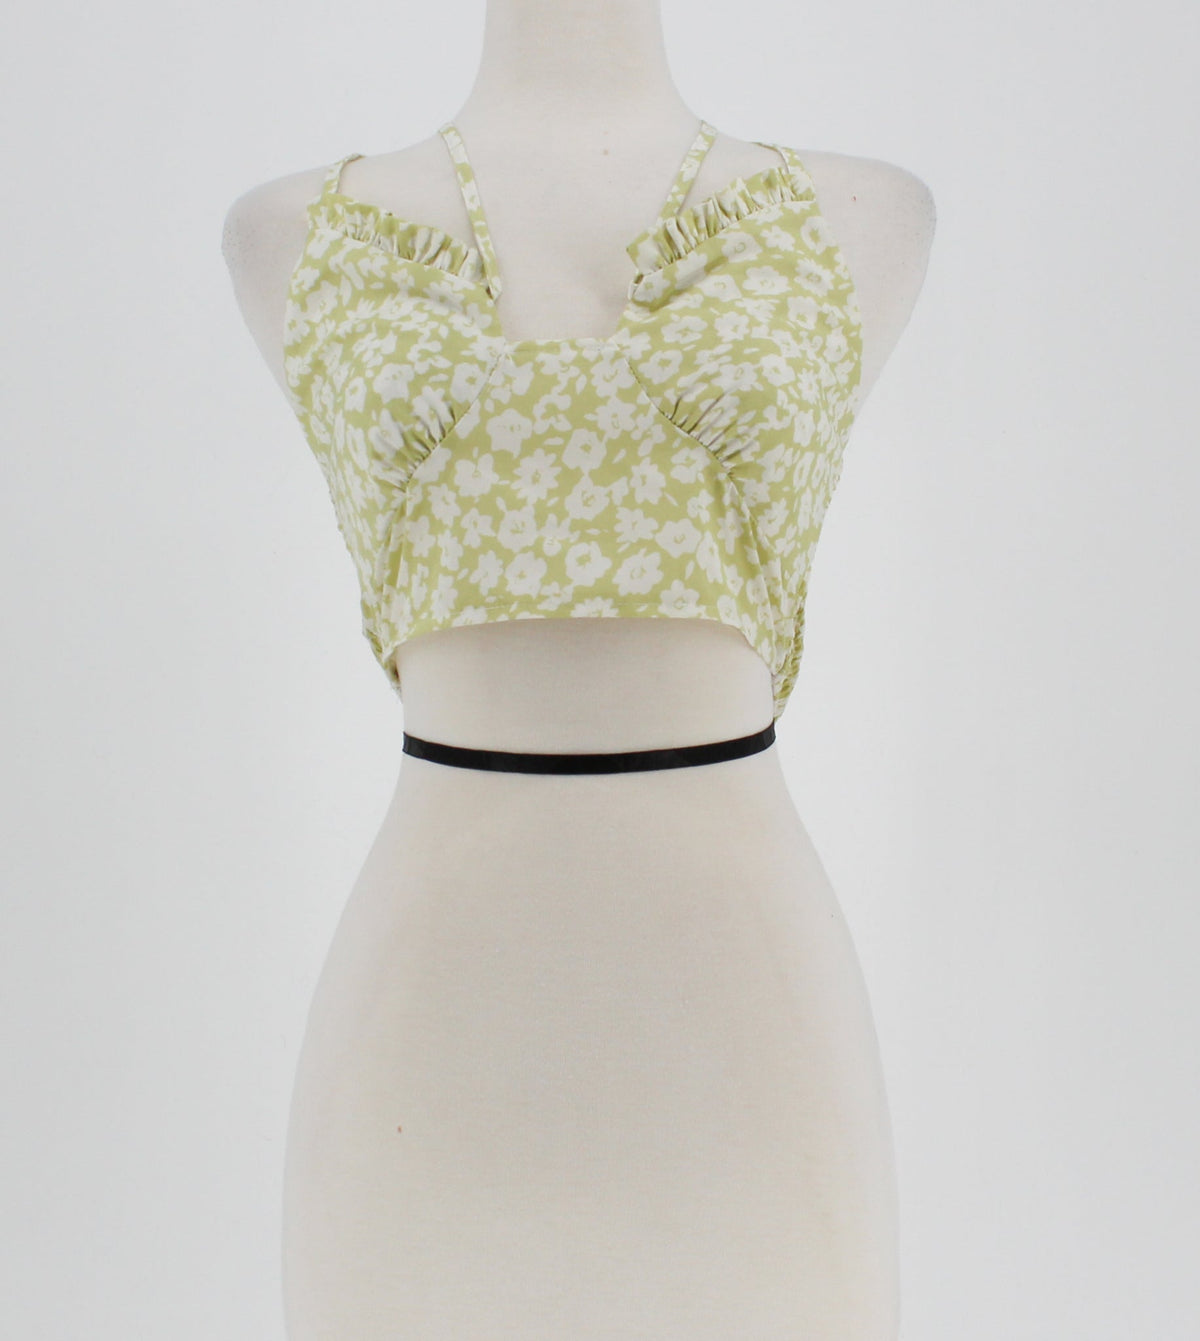 Shein Floral Crop Top with elastic back